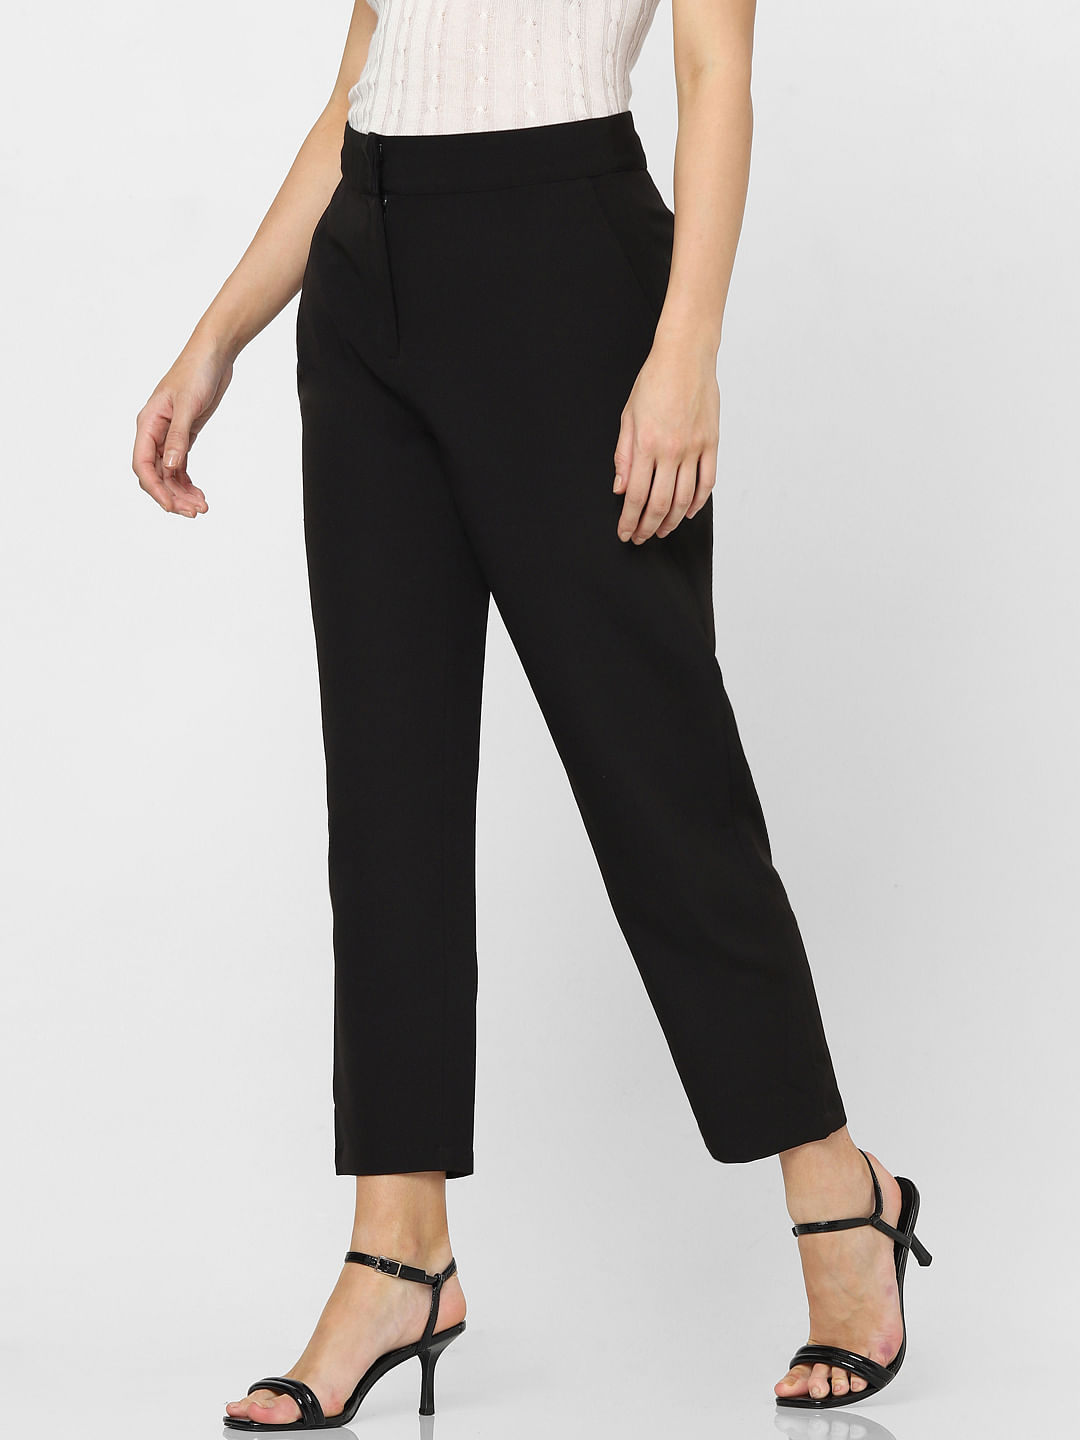 Medium Blue Solid Ankle-Length Casual Women Comfort Fit Trousers - Selling  Fast at Pantaloons.com